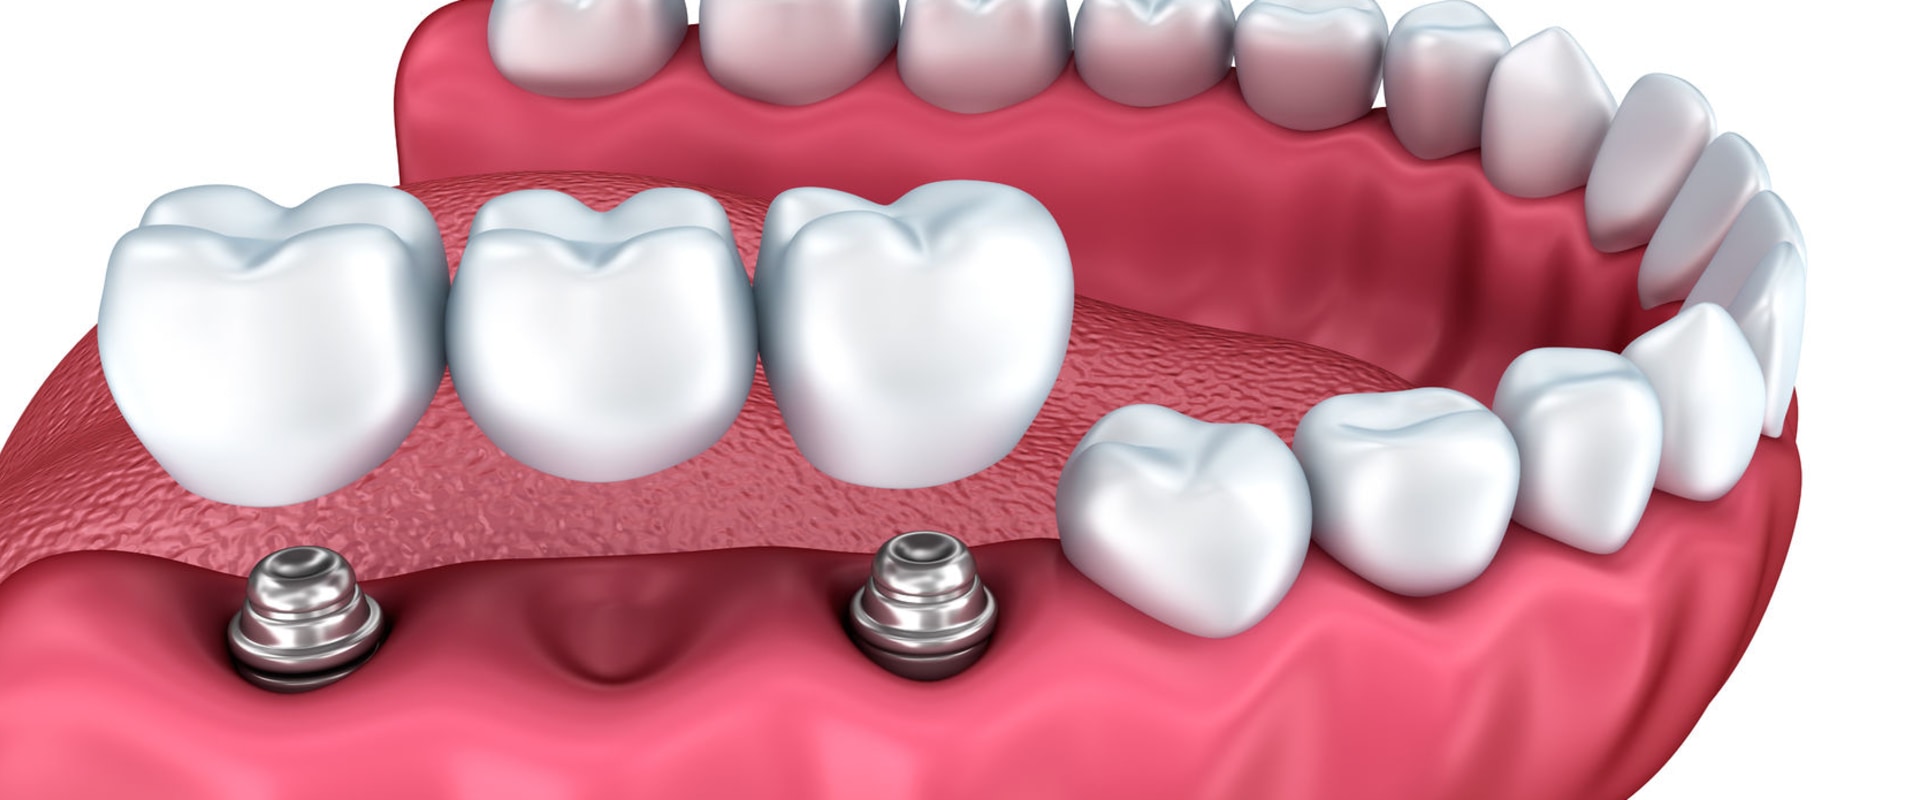 What are options instead of dental implants?